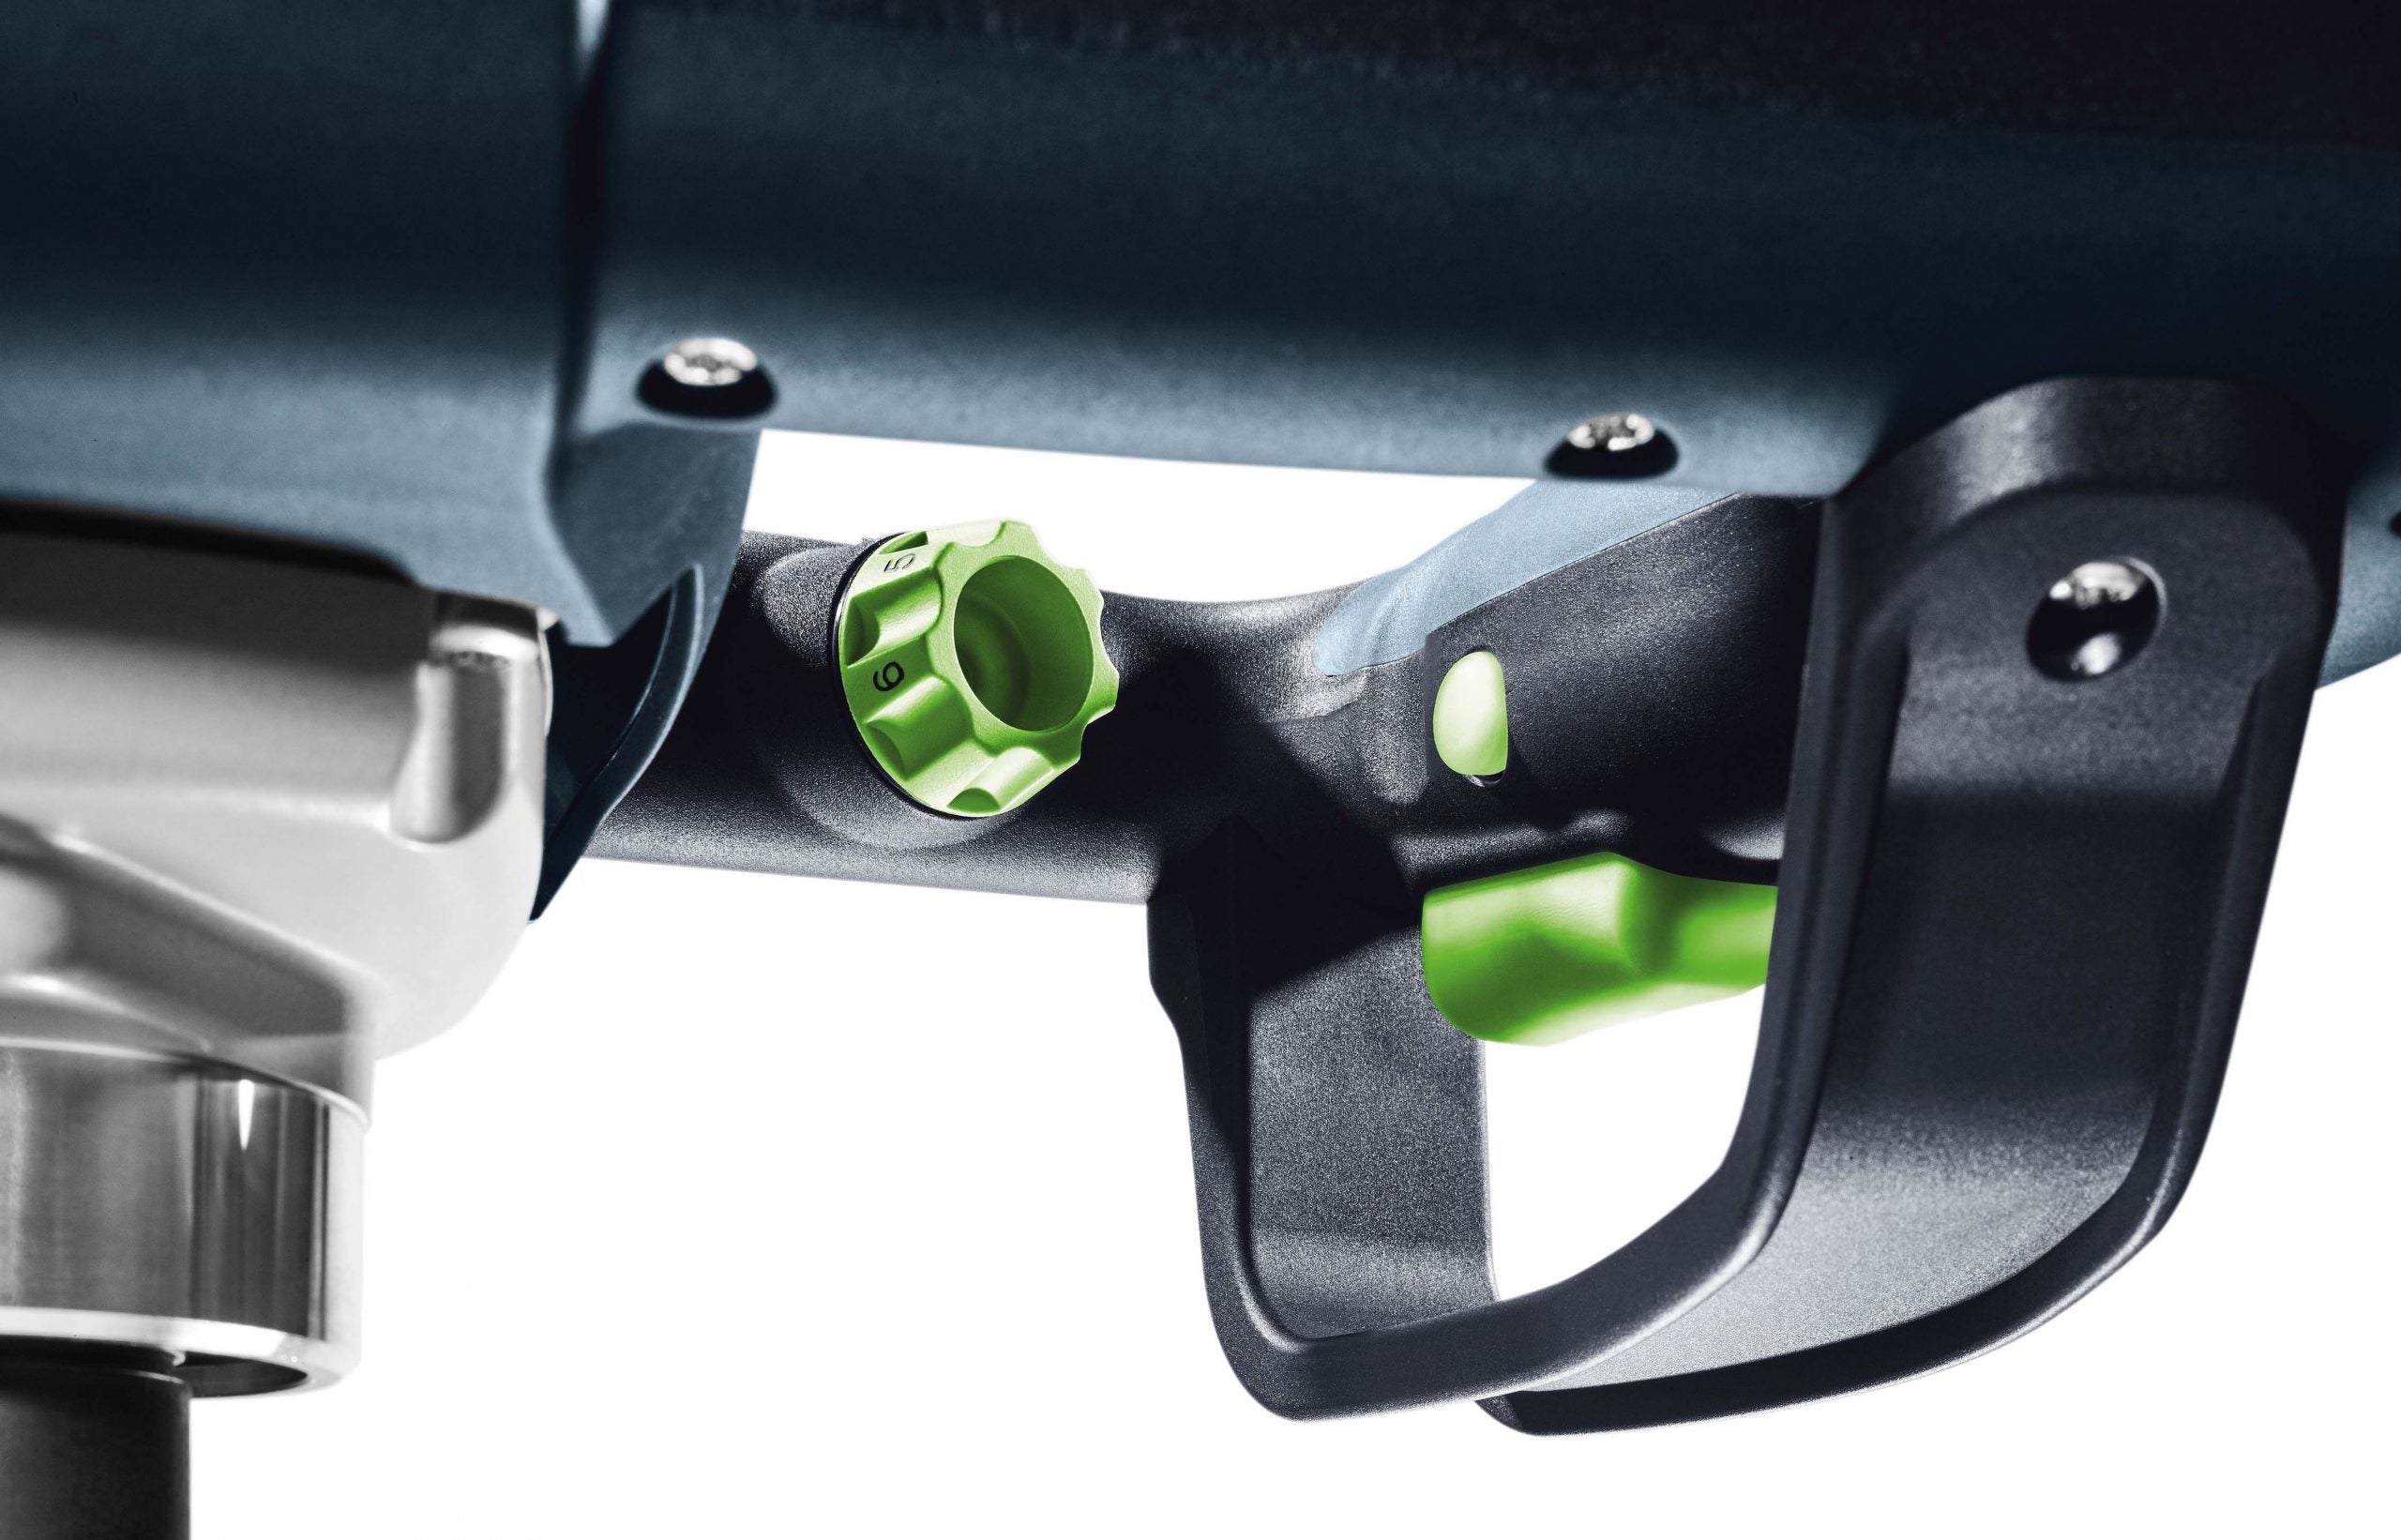 Mixing Drill for up to 40L with Left Stirring Rod MX1000 575809 by Festool